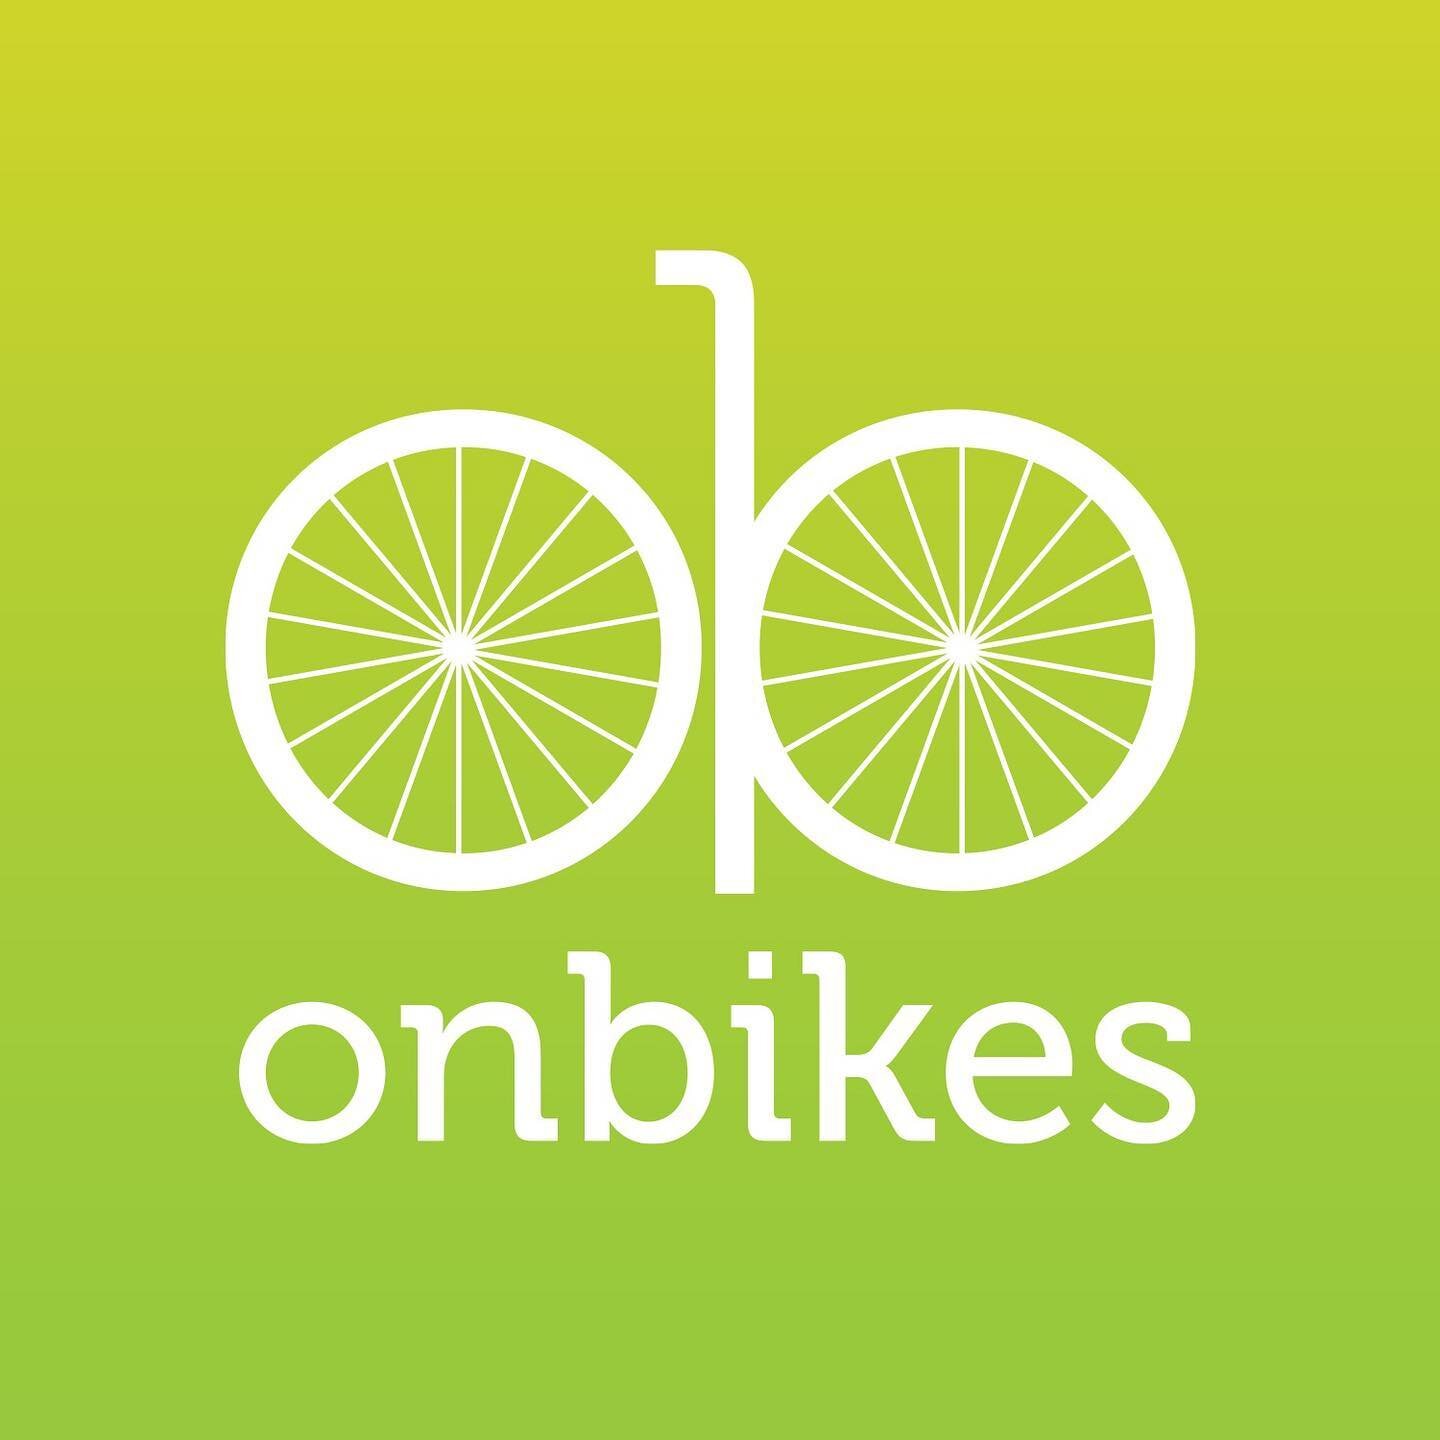 This is an organization that has my heart ❤️ I am so happy to be back working with @onbikes after stepping away for a few years. This logo was born over a decade ago when a few friends wanted to do something good for their community. Now it&rsquo;s o